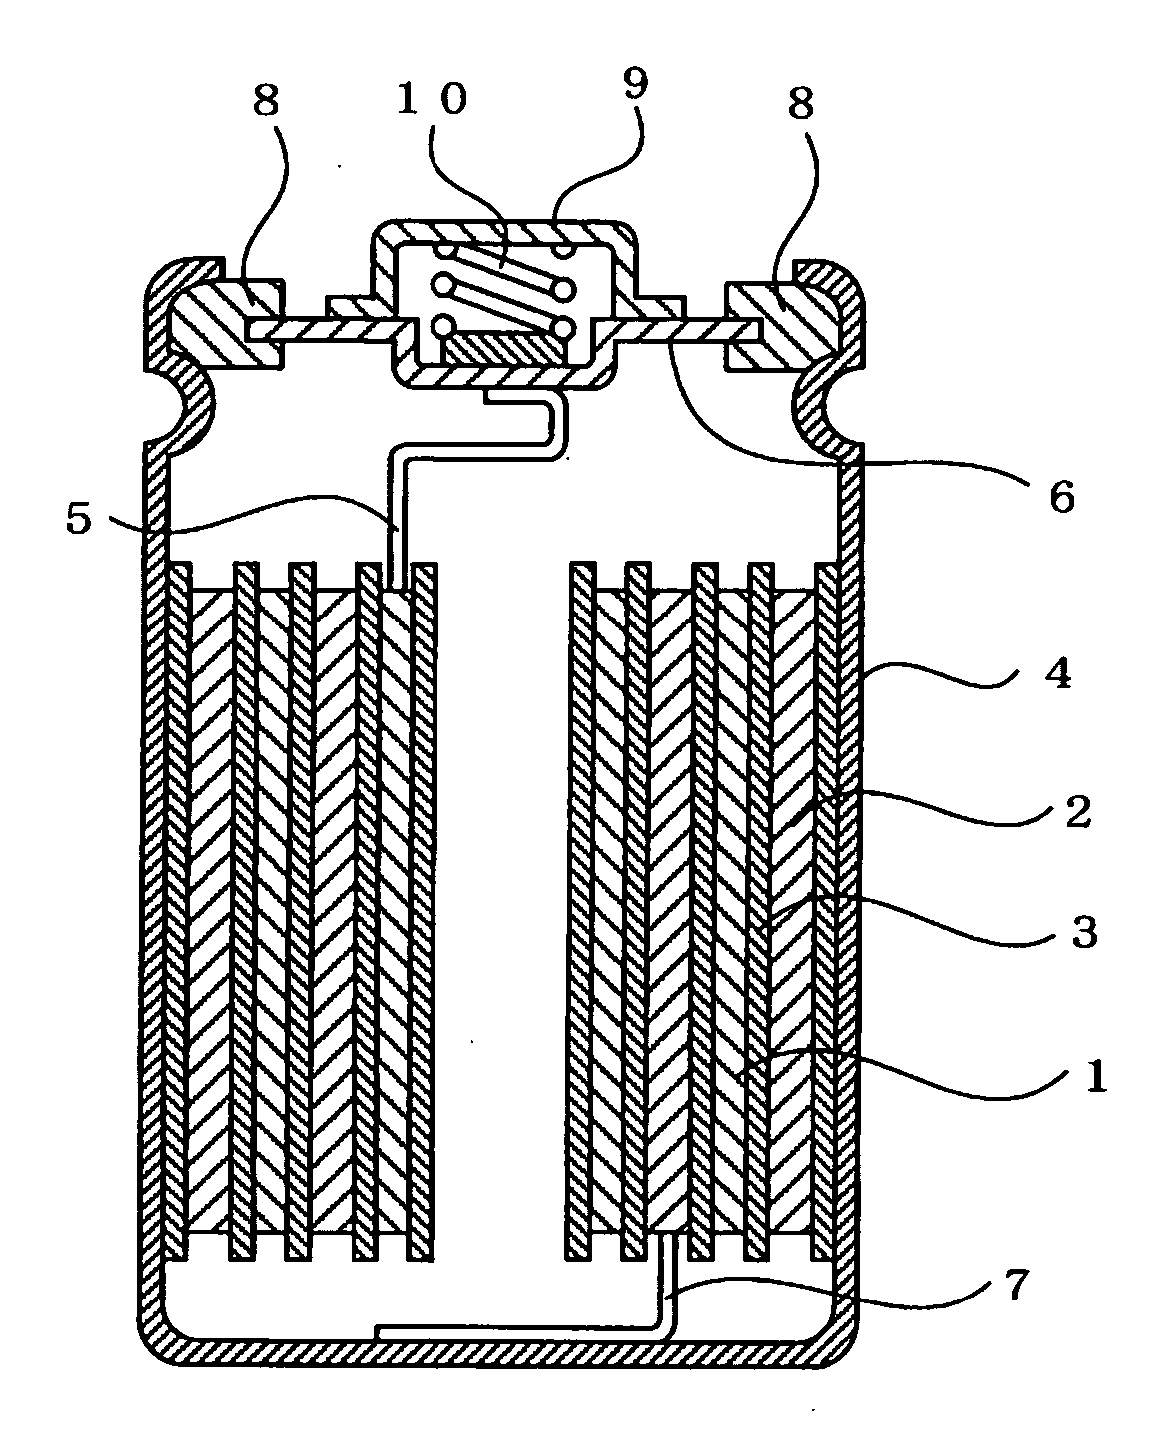 Hydrogen-absorbing alloy electrode, alkaline storage battery, and method of manufacturing the alkaline storage battery